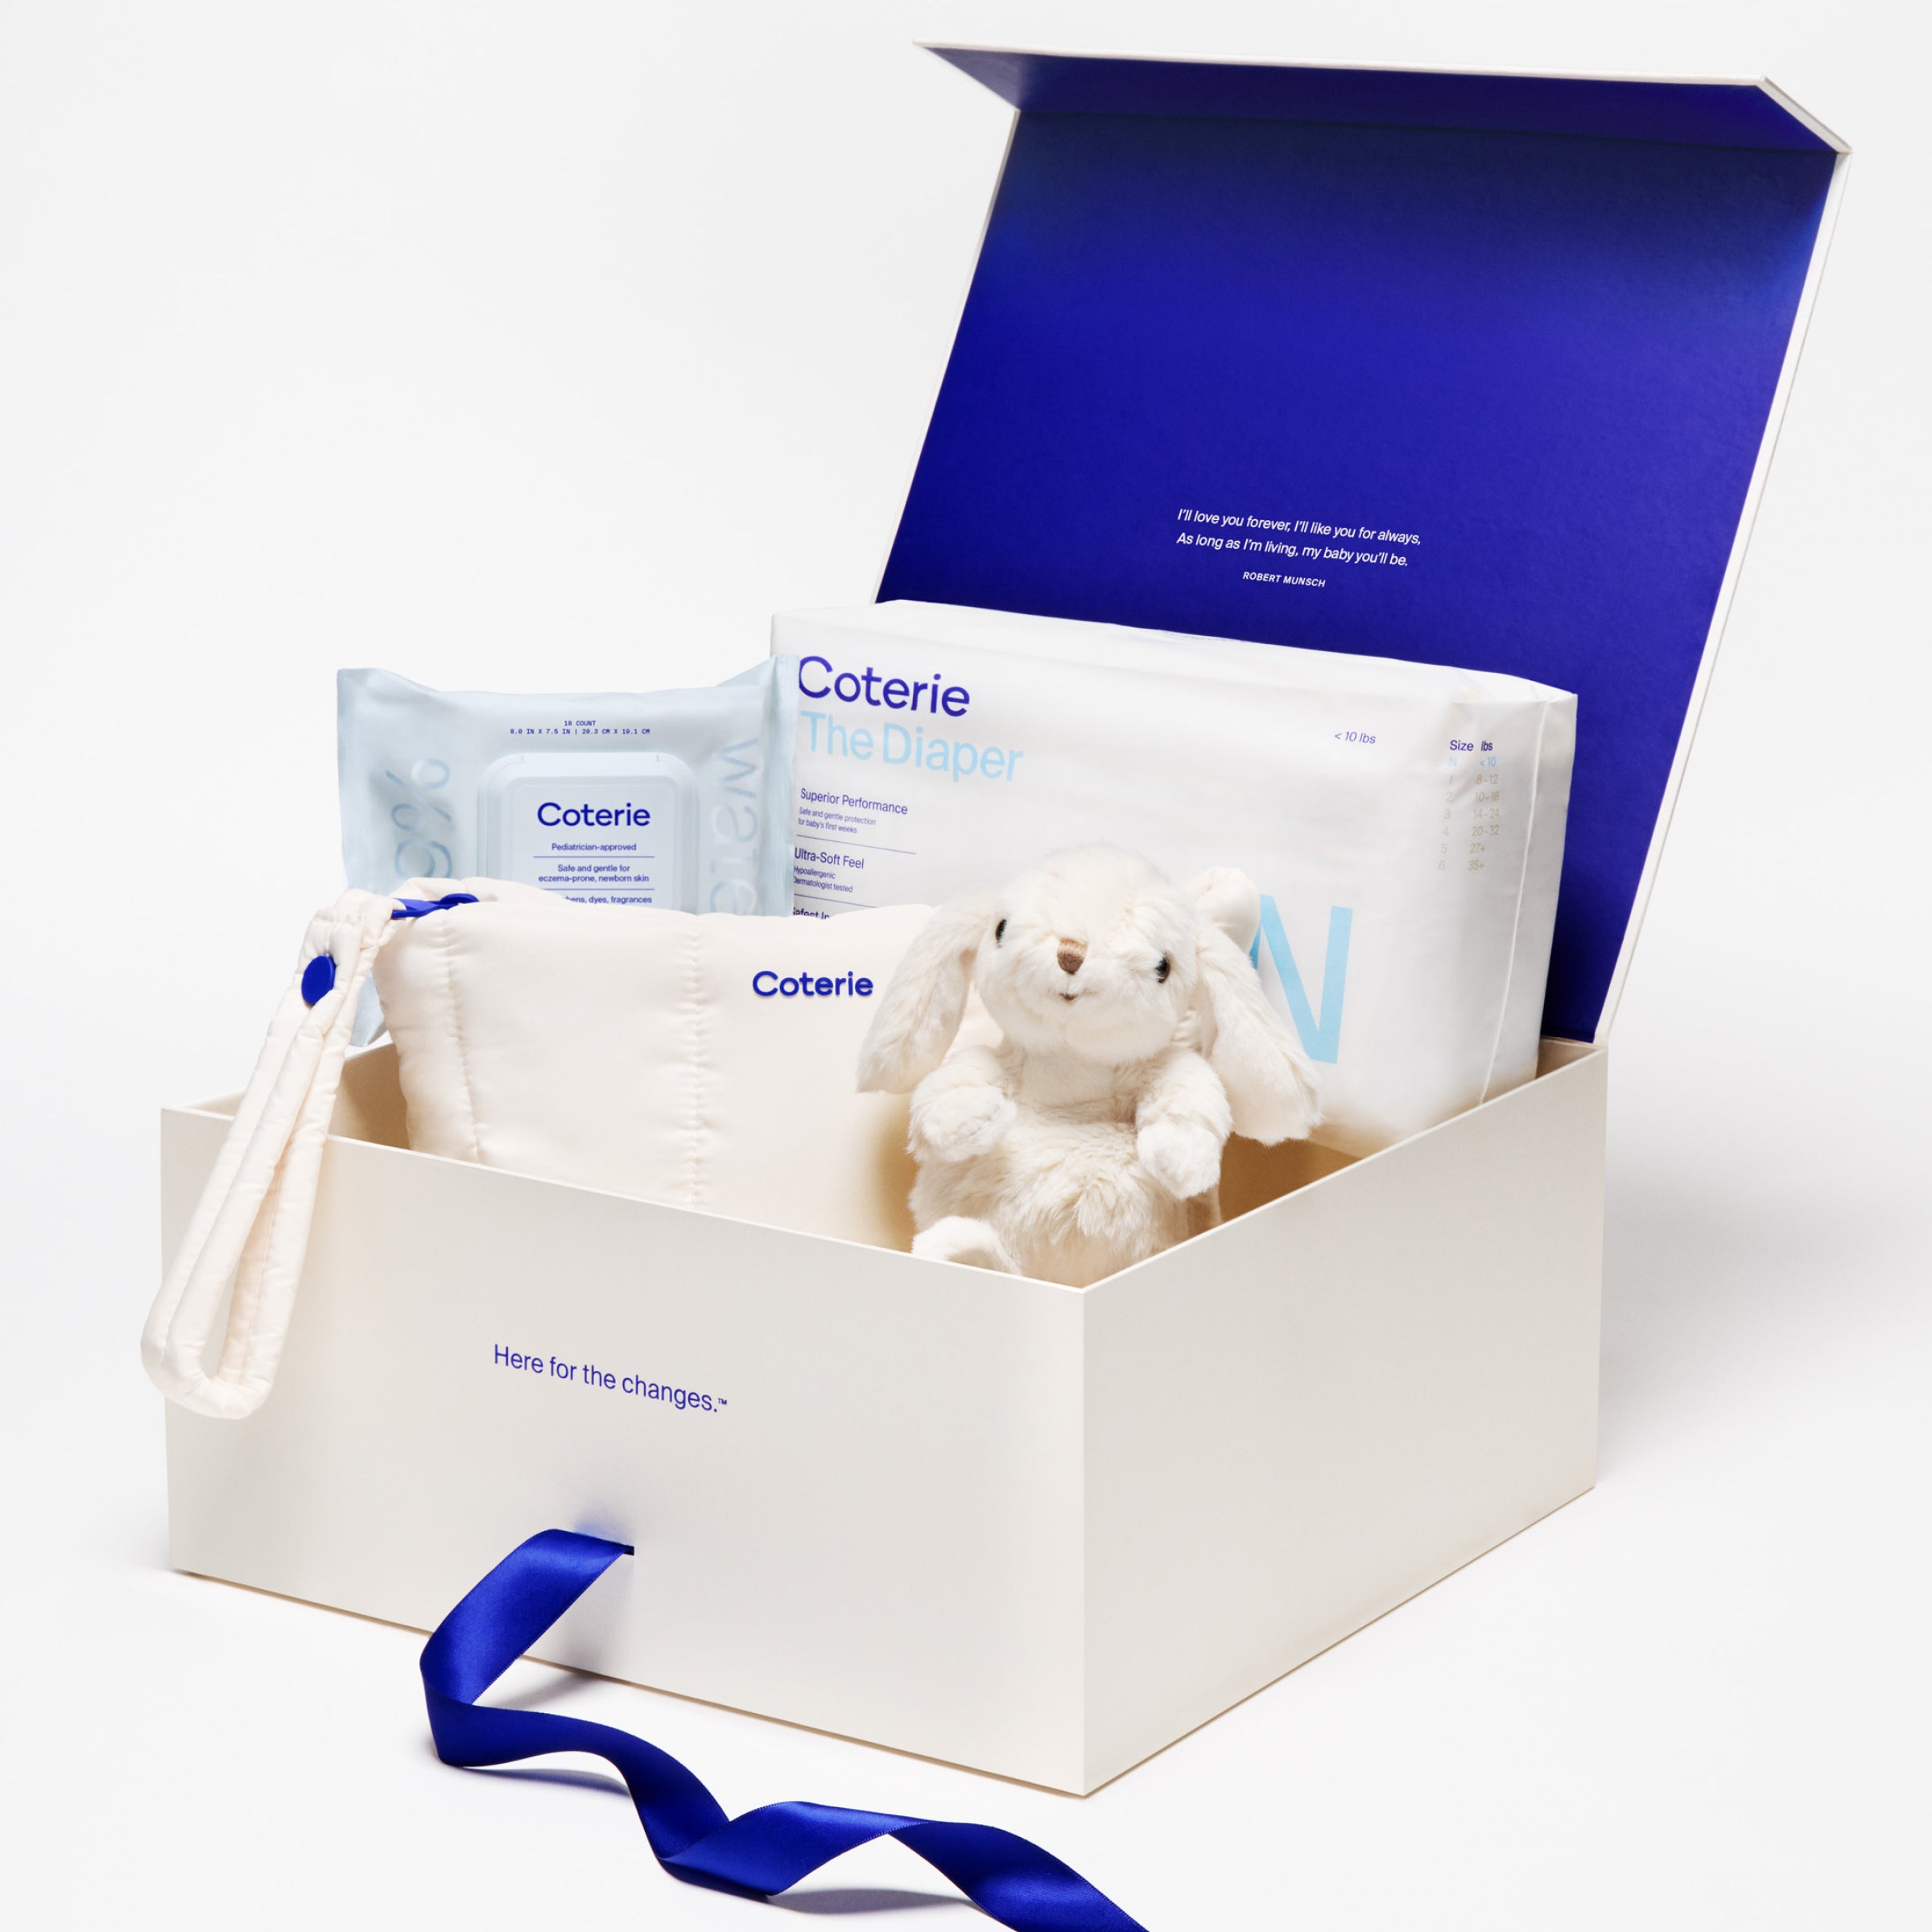 The Newborn Gift from Coterie  The perfect gift for new parents